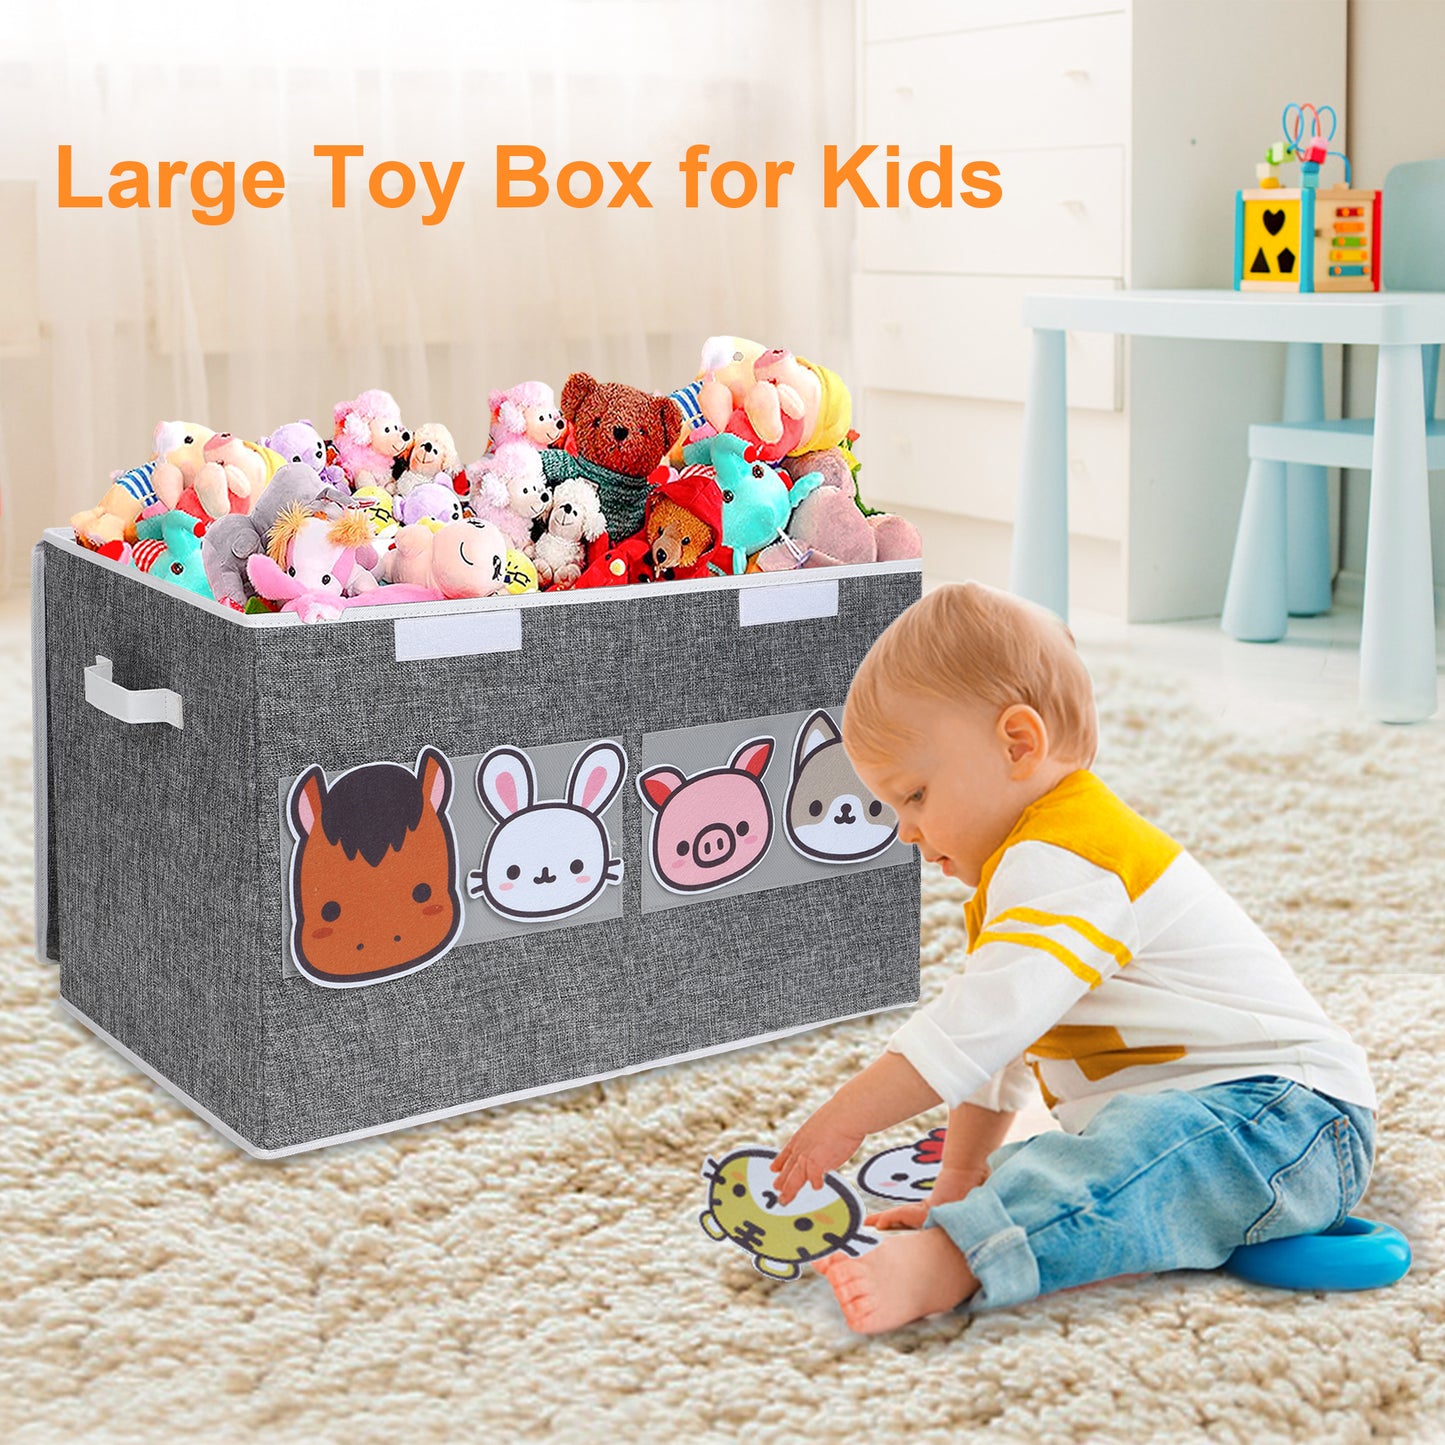 Toy Box for Kids, Toy Chests Organizers Storage for Boys and Girls with Flip-Top Lid, Large Fabric Toy Storage Box with Clear Window, Kids Toy Boxes Bins, Gray(24x13x14 in)